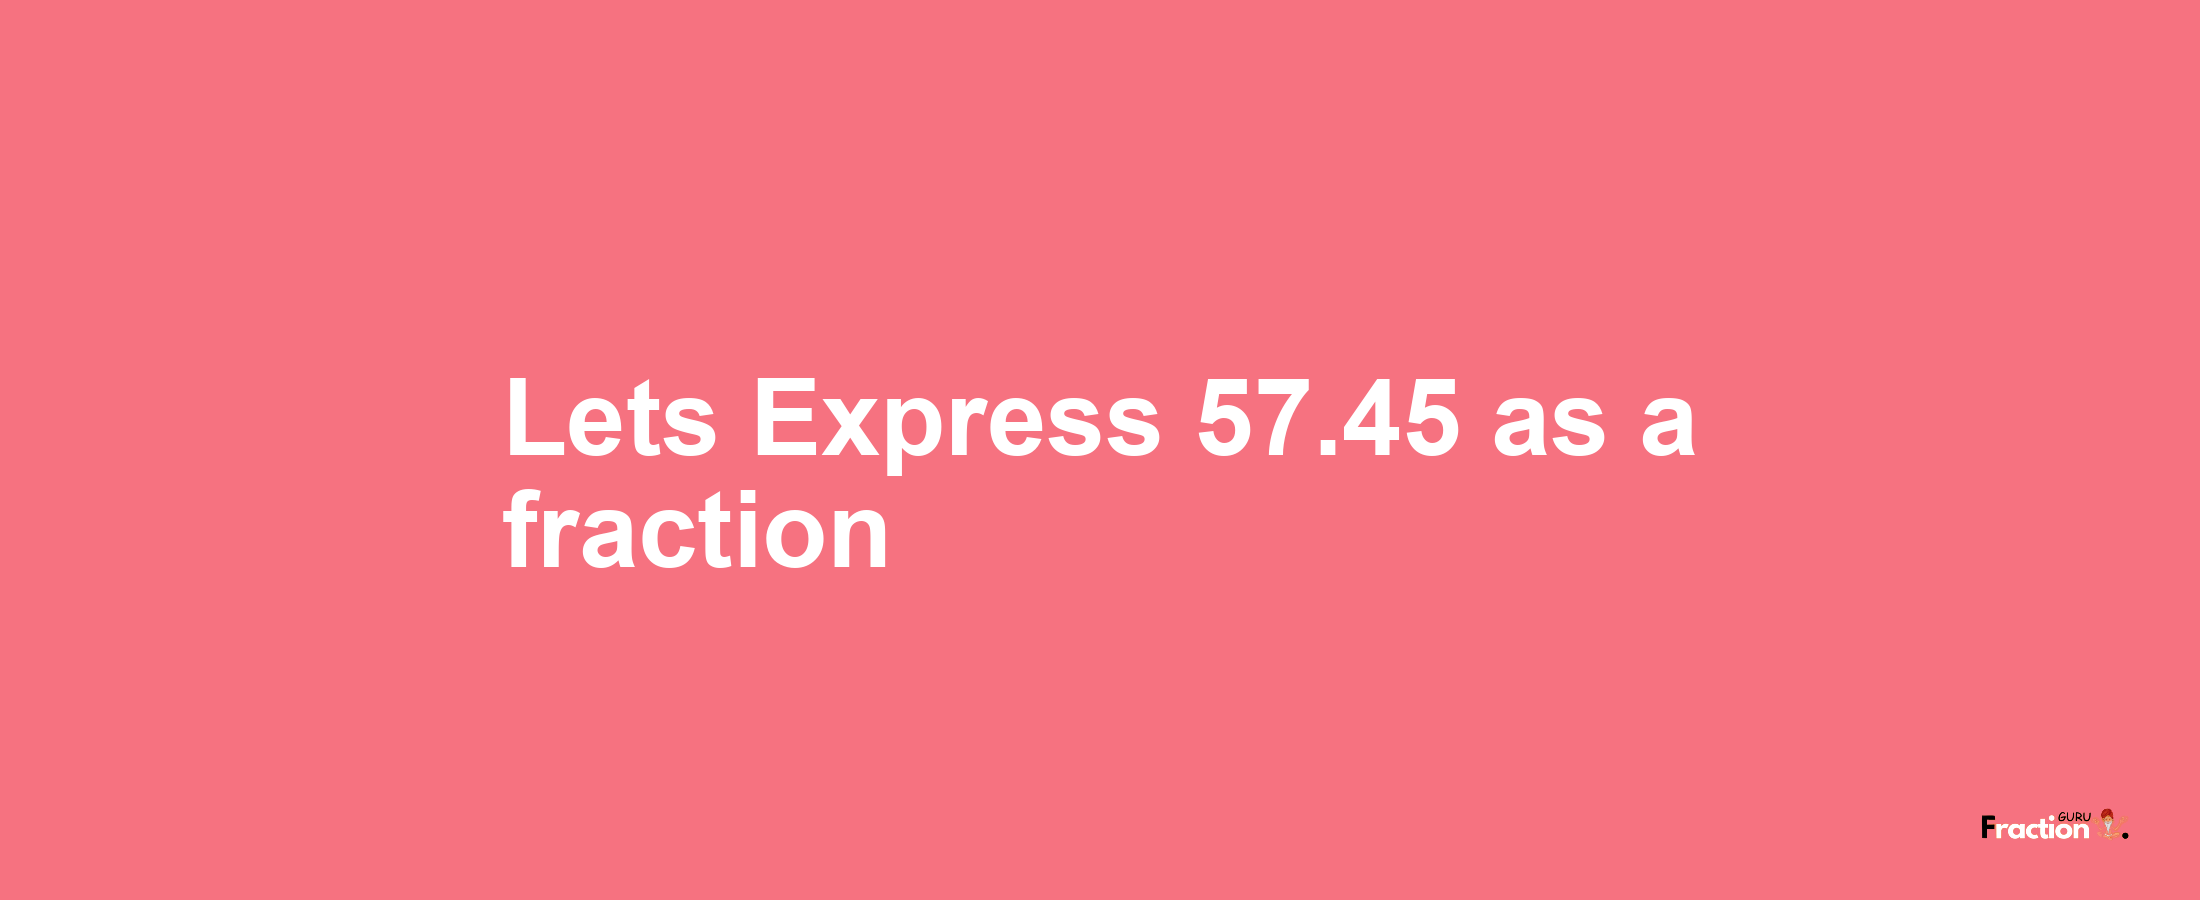 Lets Express 57.45 as afraction